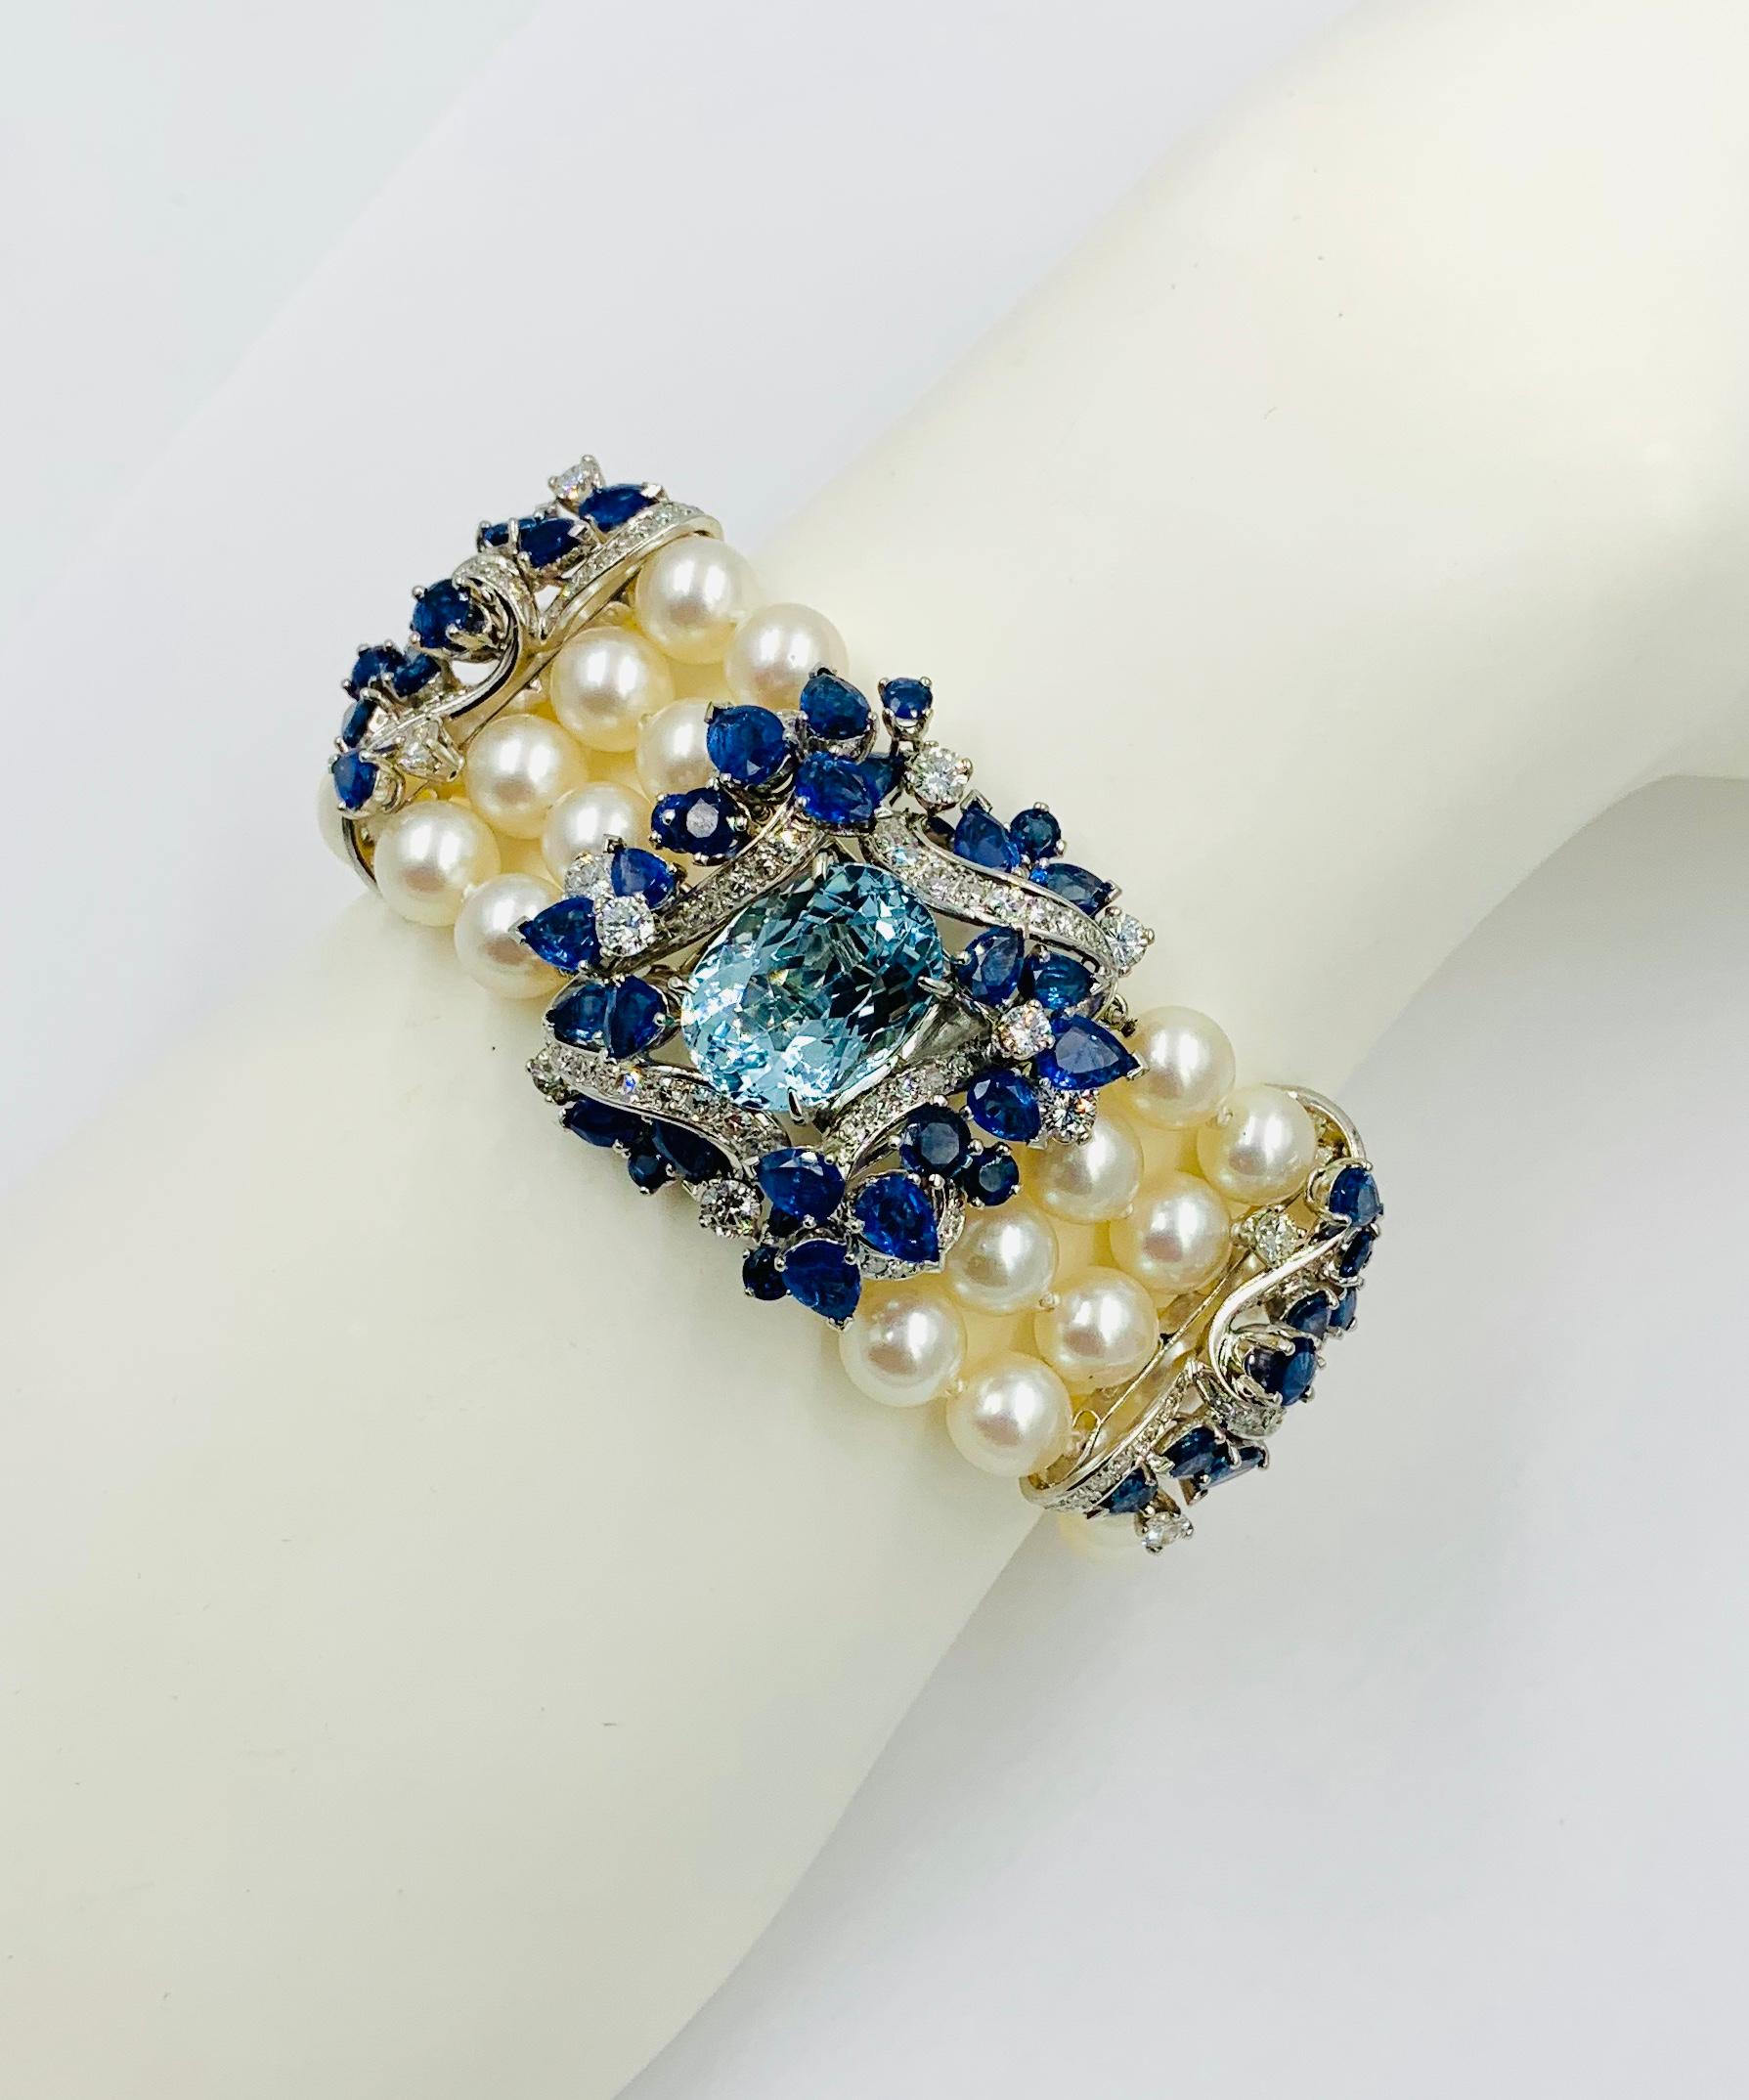 This is a magnificent French statement Four Strand Pearl Bracelet set with a spectacular central 7 Carat Aquamarine.  The Aquamarine is surrounded by 10 Carats of fine blue Sapphires and spectacular white clean Diamonds.  The jewels are set in 18